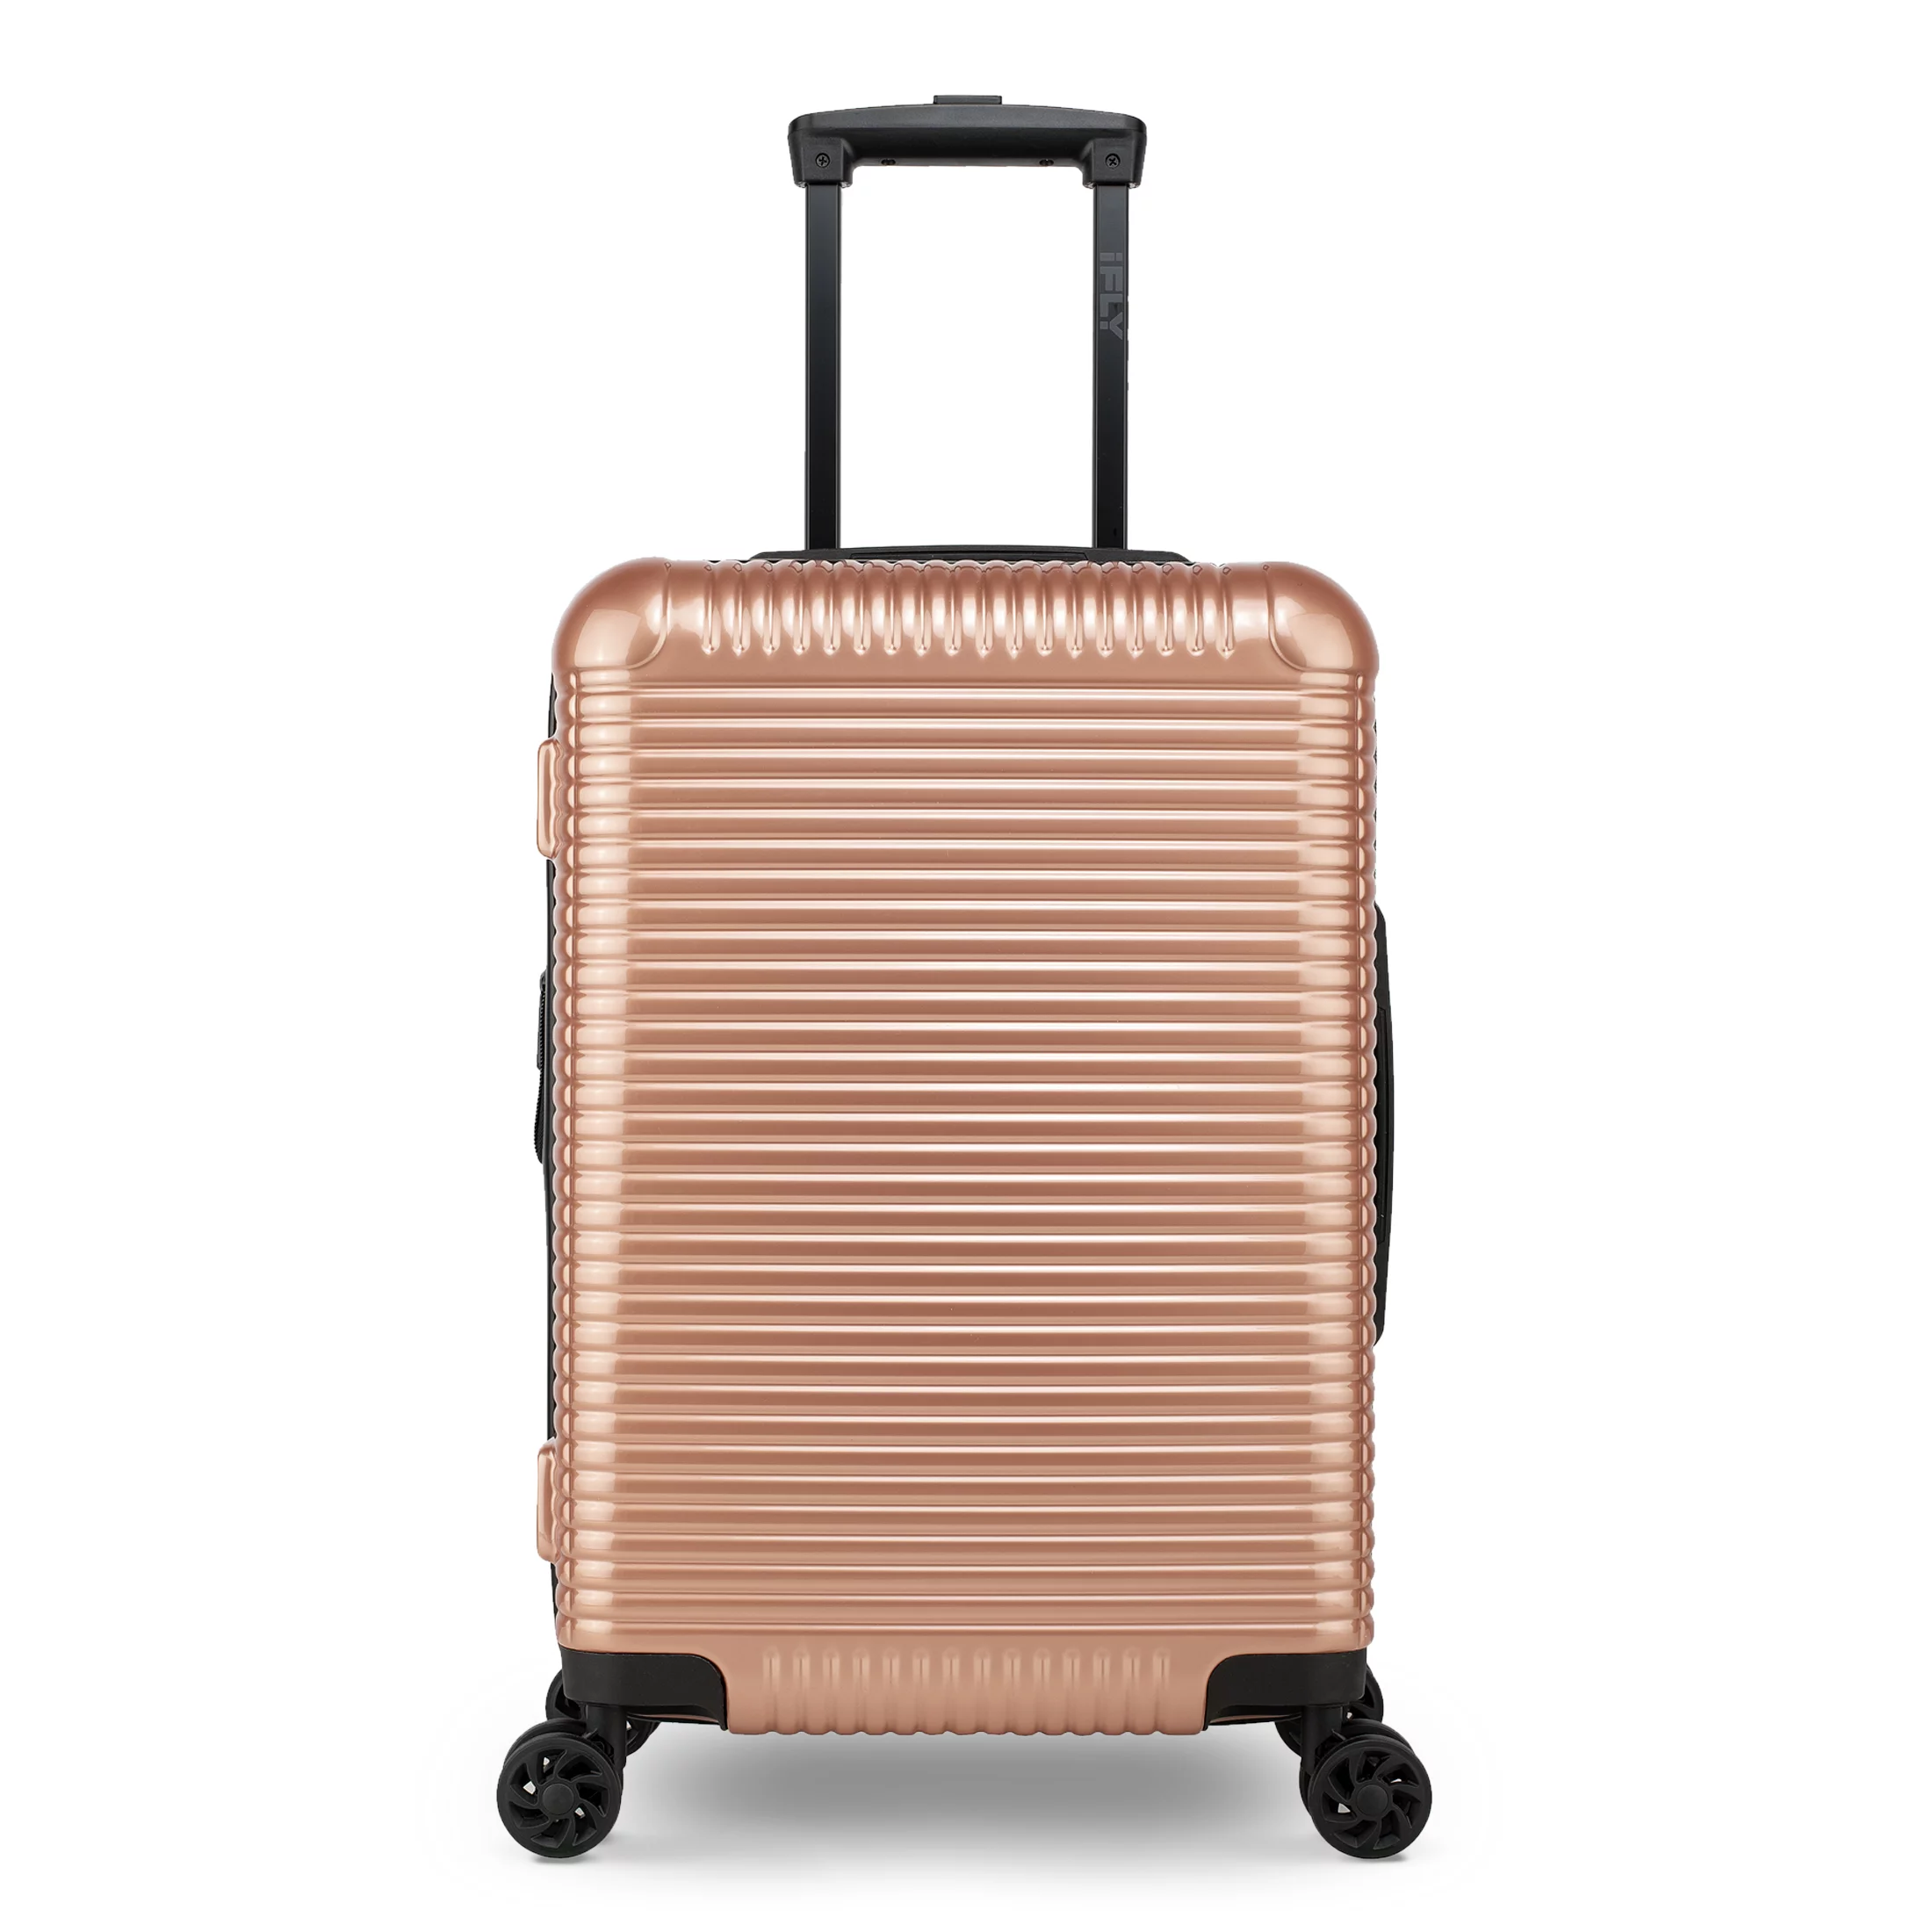 ifly 20 inch carry on luggage